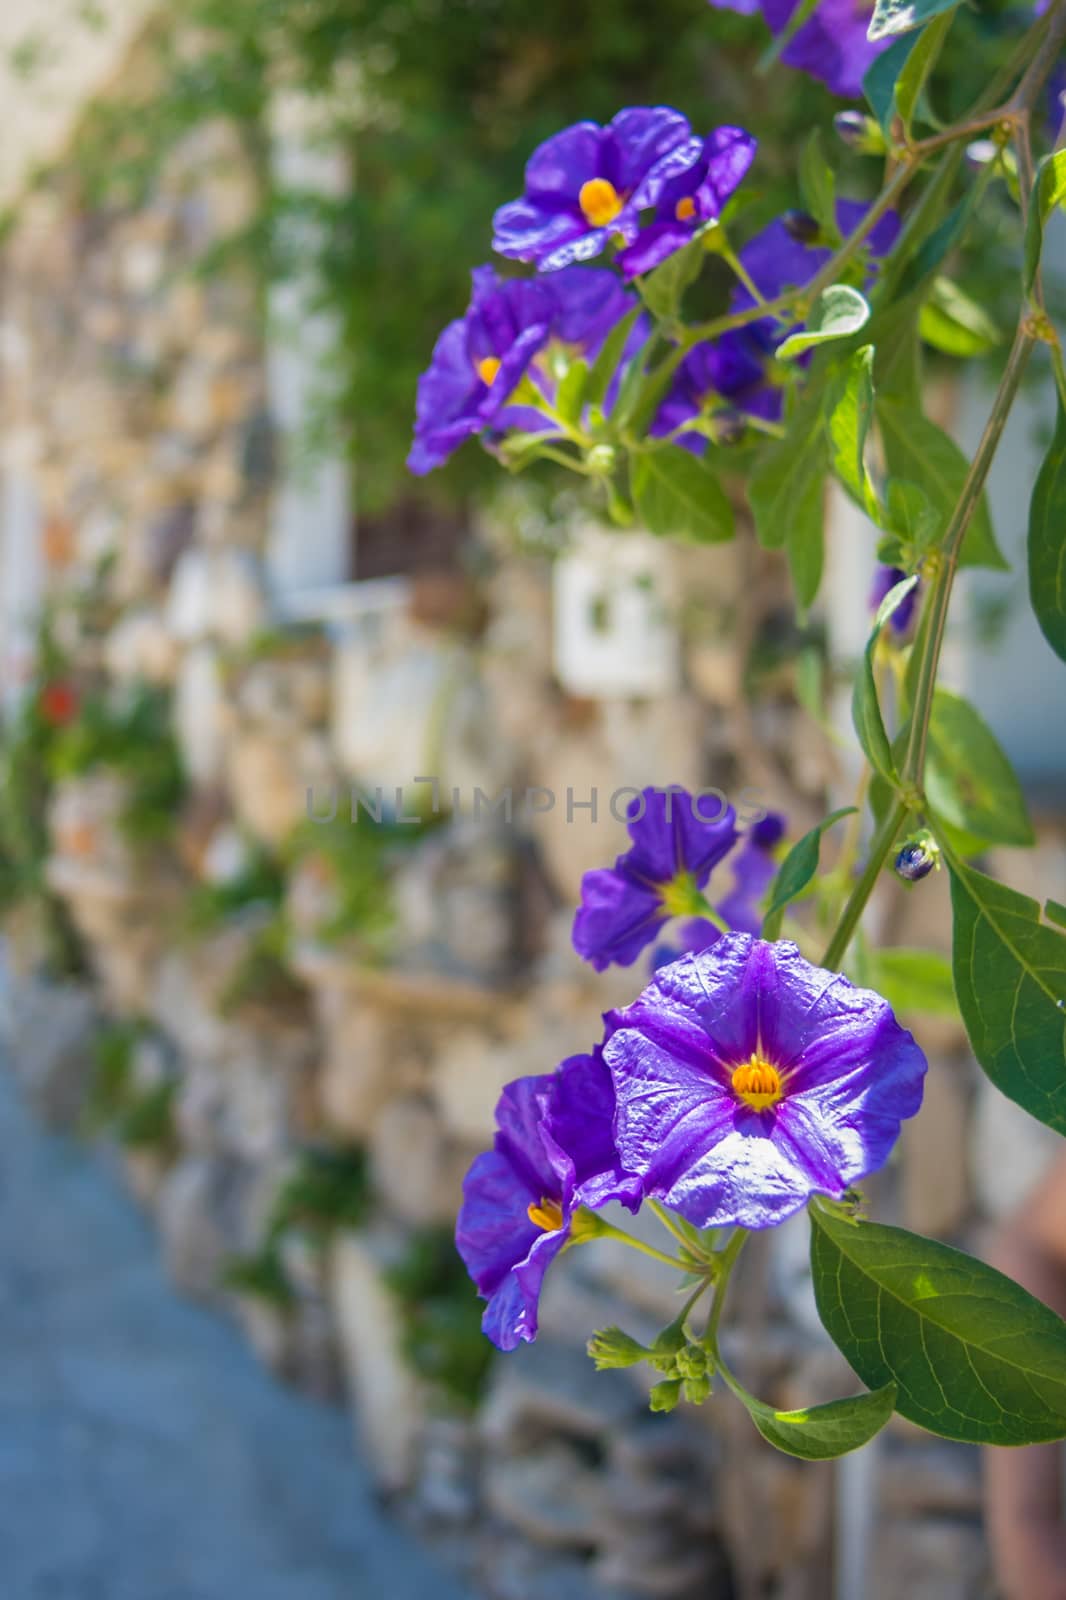 Violet Jasmine growing at a natural stone wall in Greece by MXW_Stock